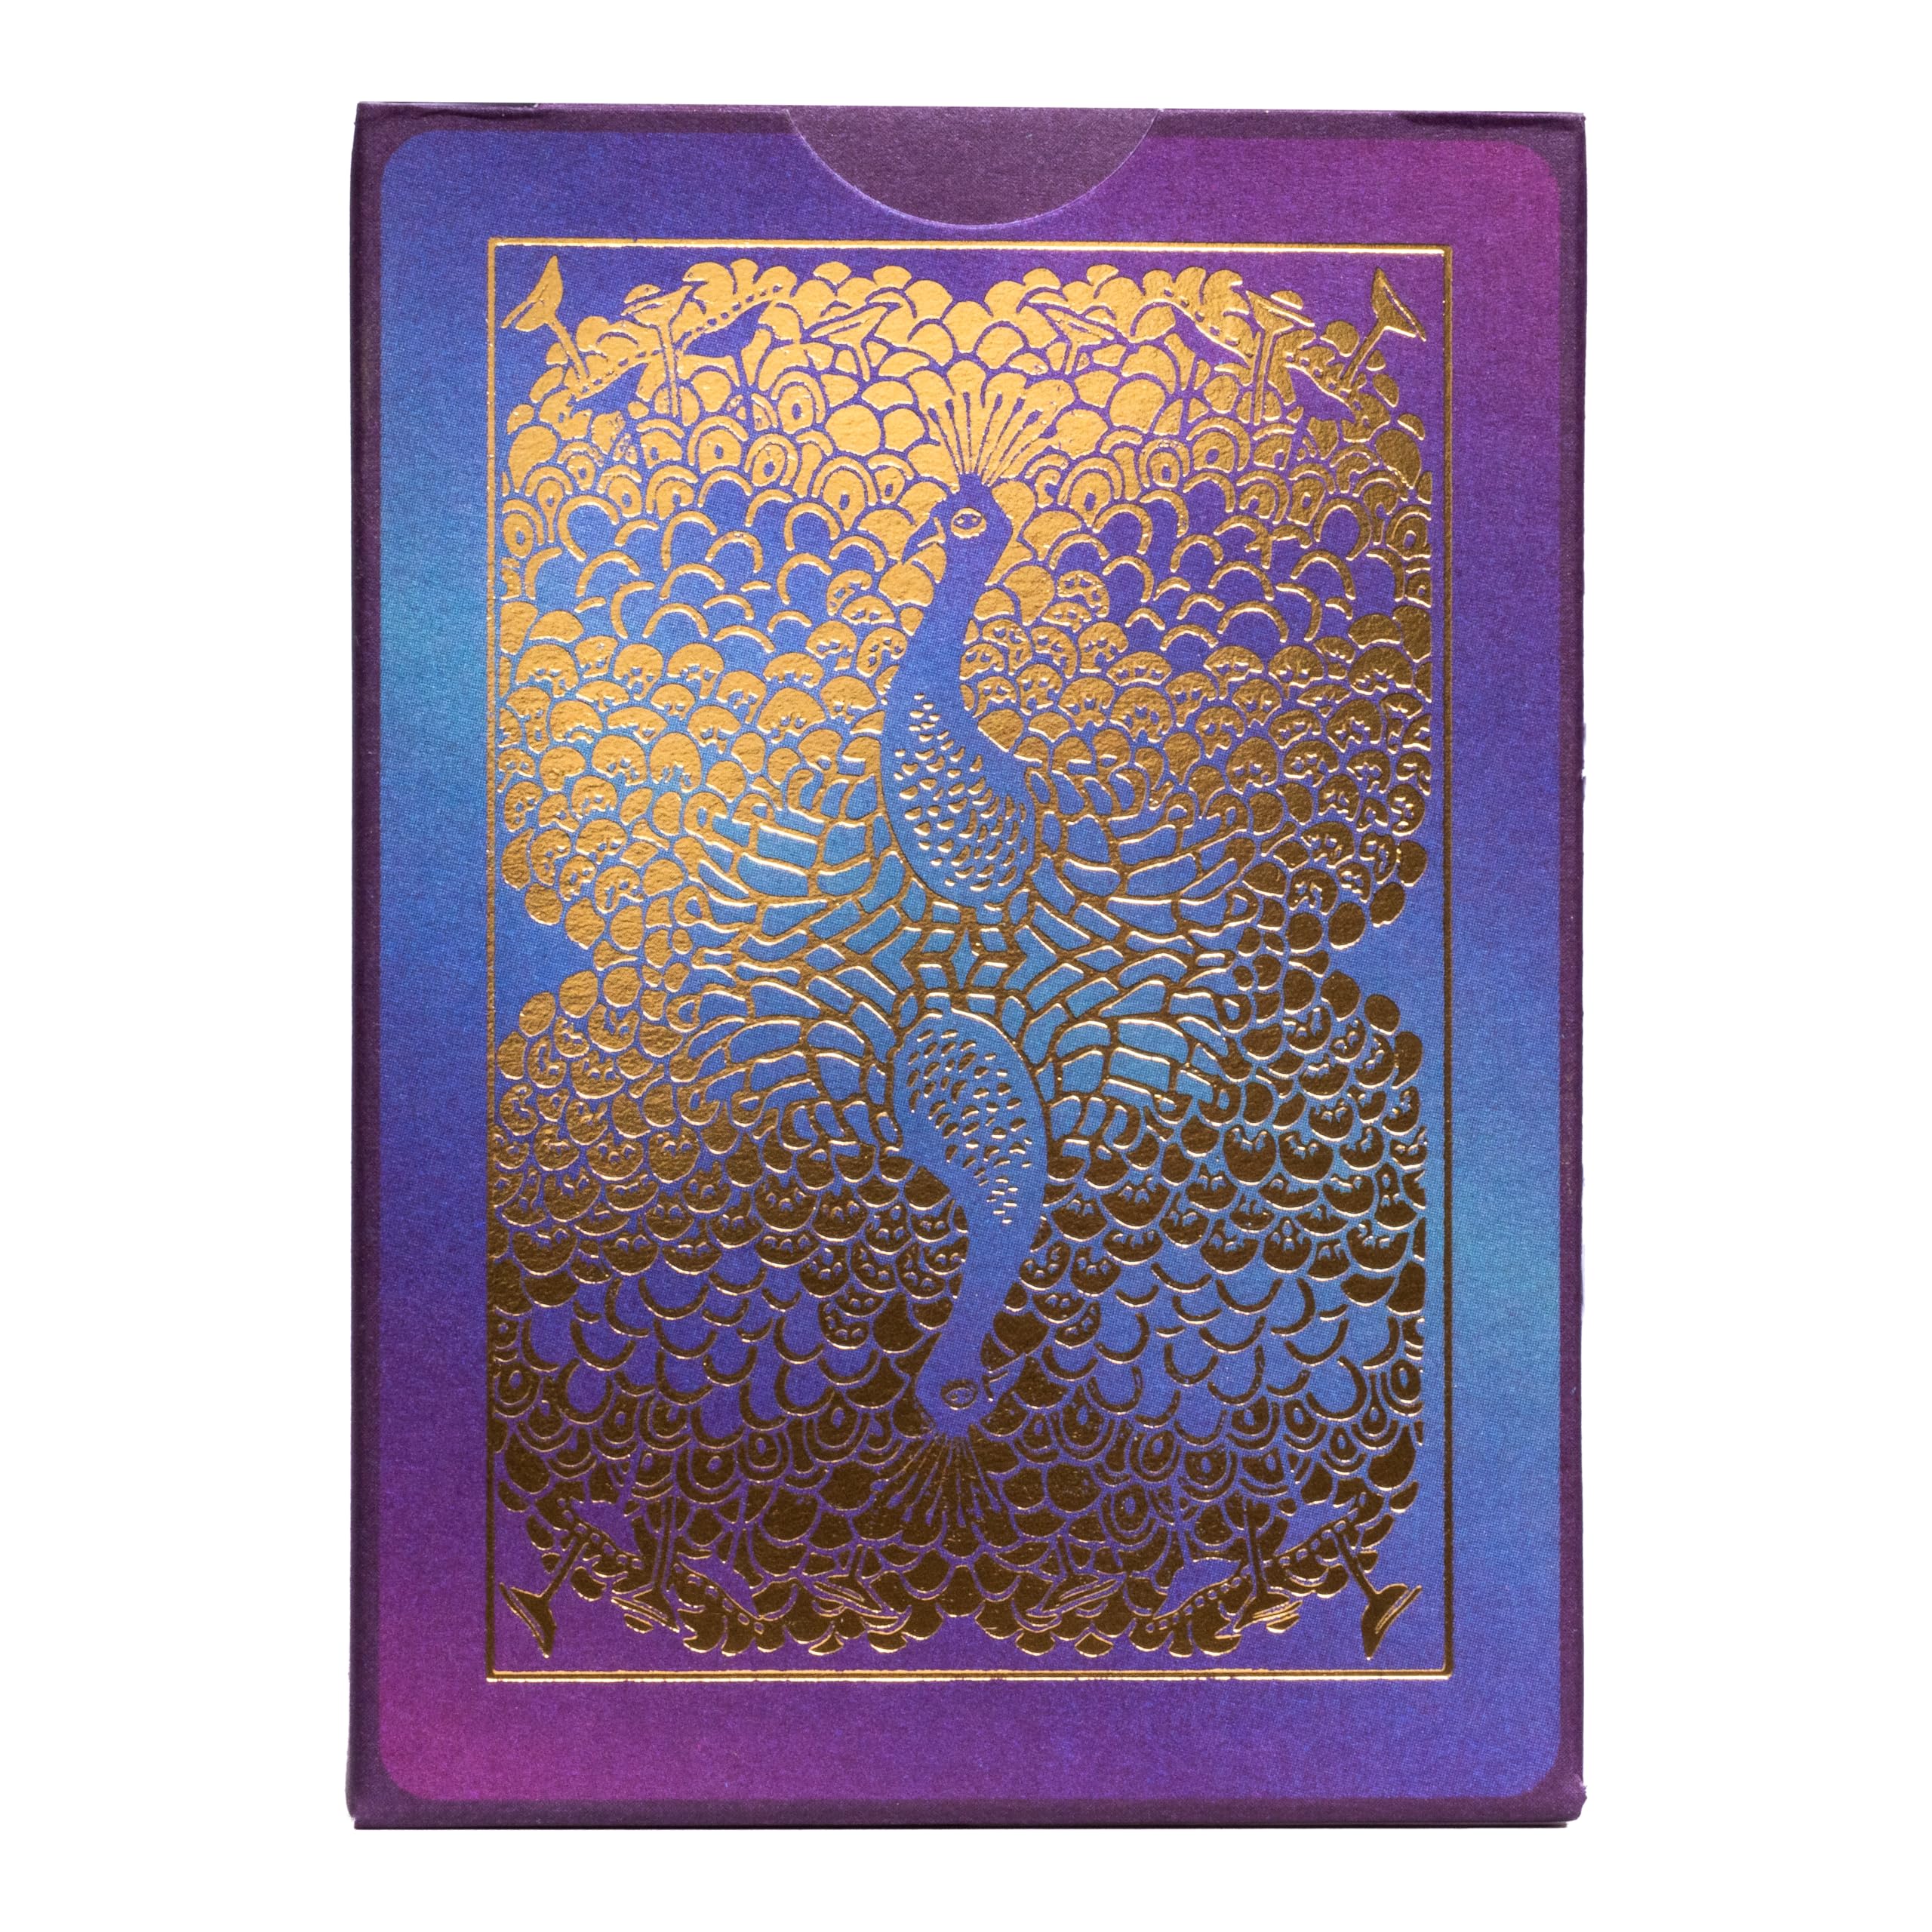 Bicycle Peacock Playing Cards - Purple - Cold Foil Premium Playing Card Deck for Card Games and Magic Tricks - Dazzling Design, Smooth Finish